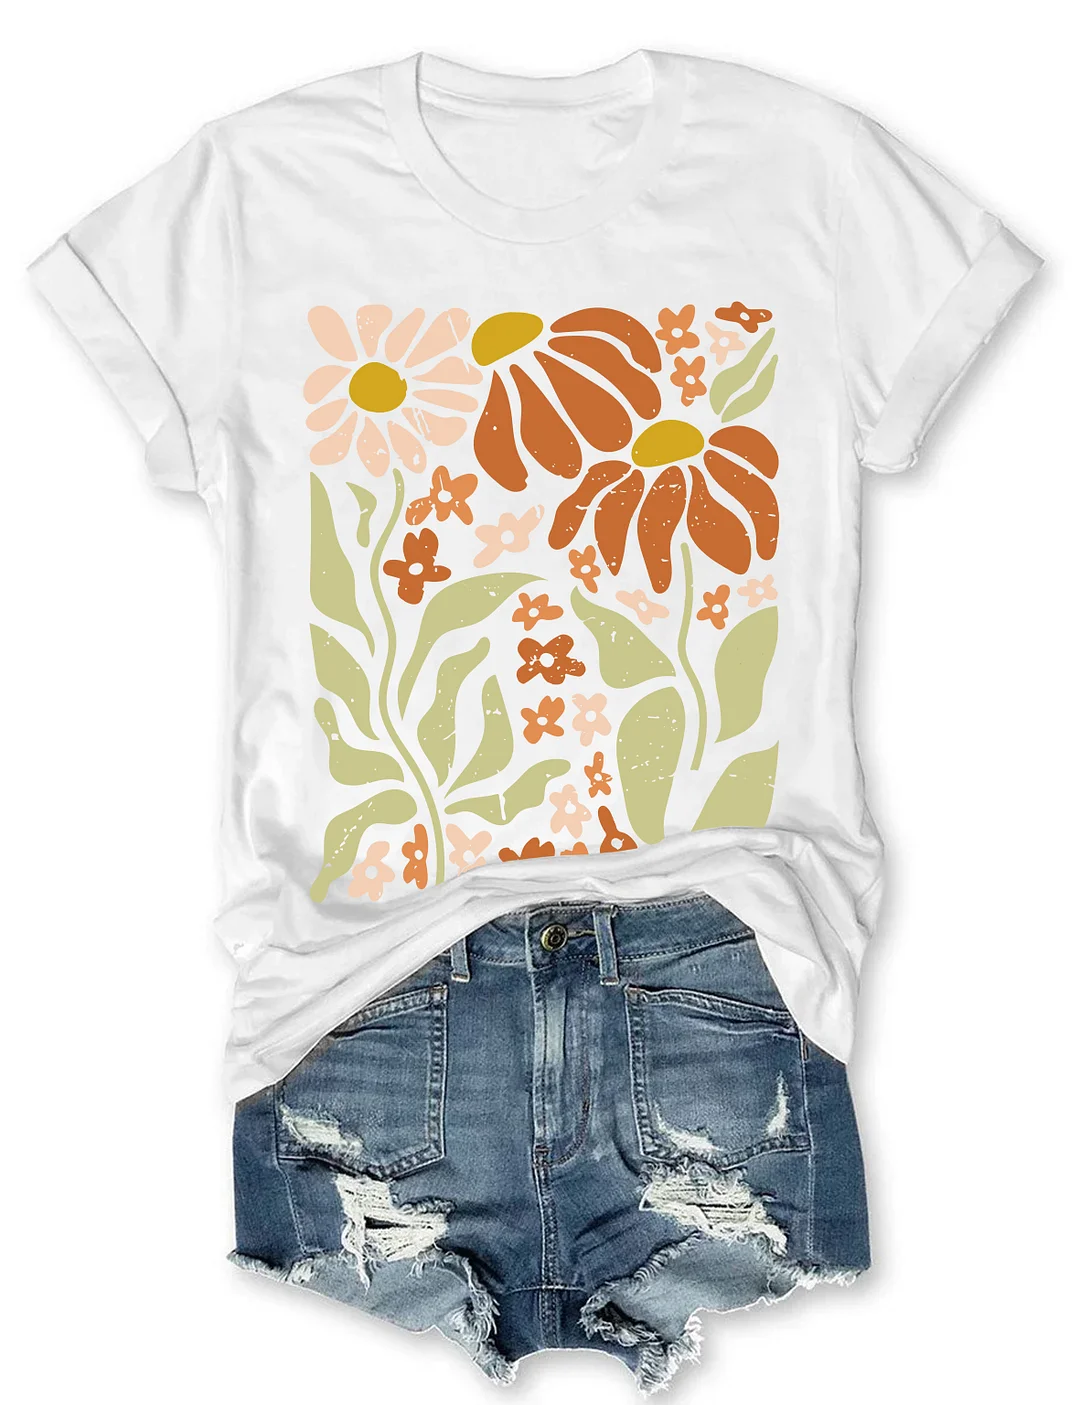 Boho Wildflowers Floral Nature T-shirt